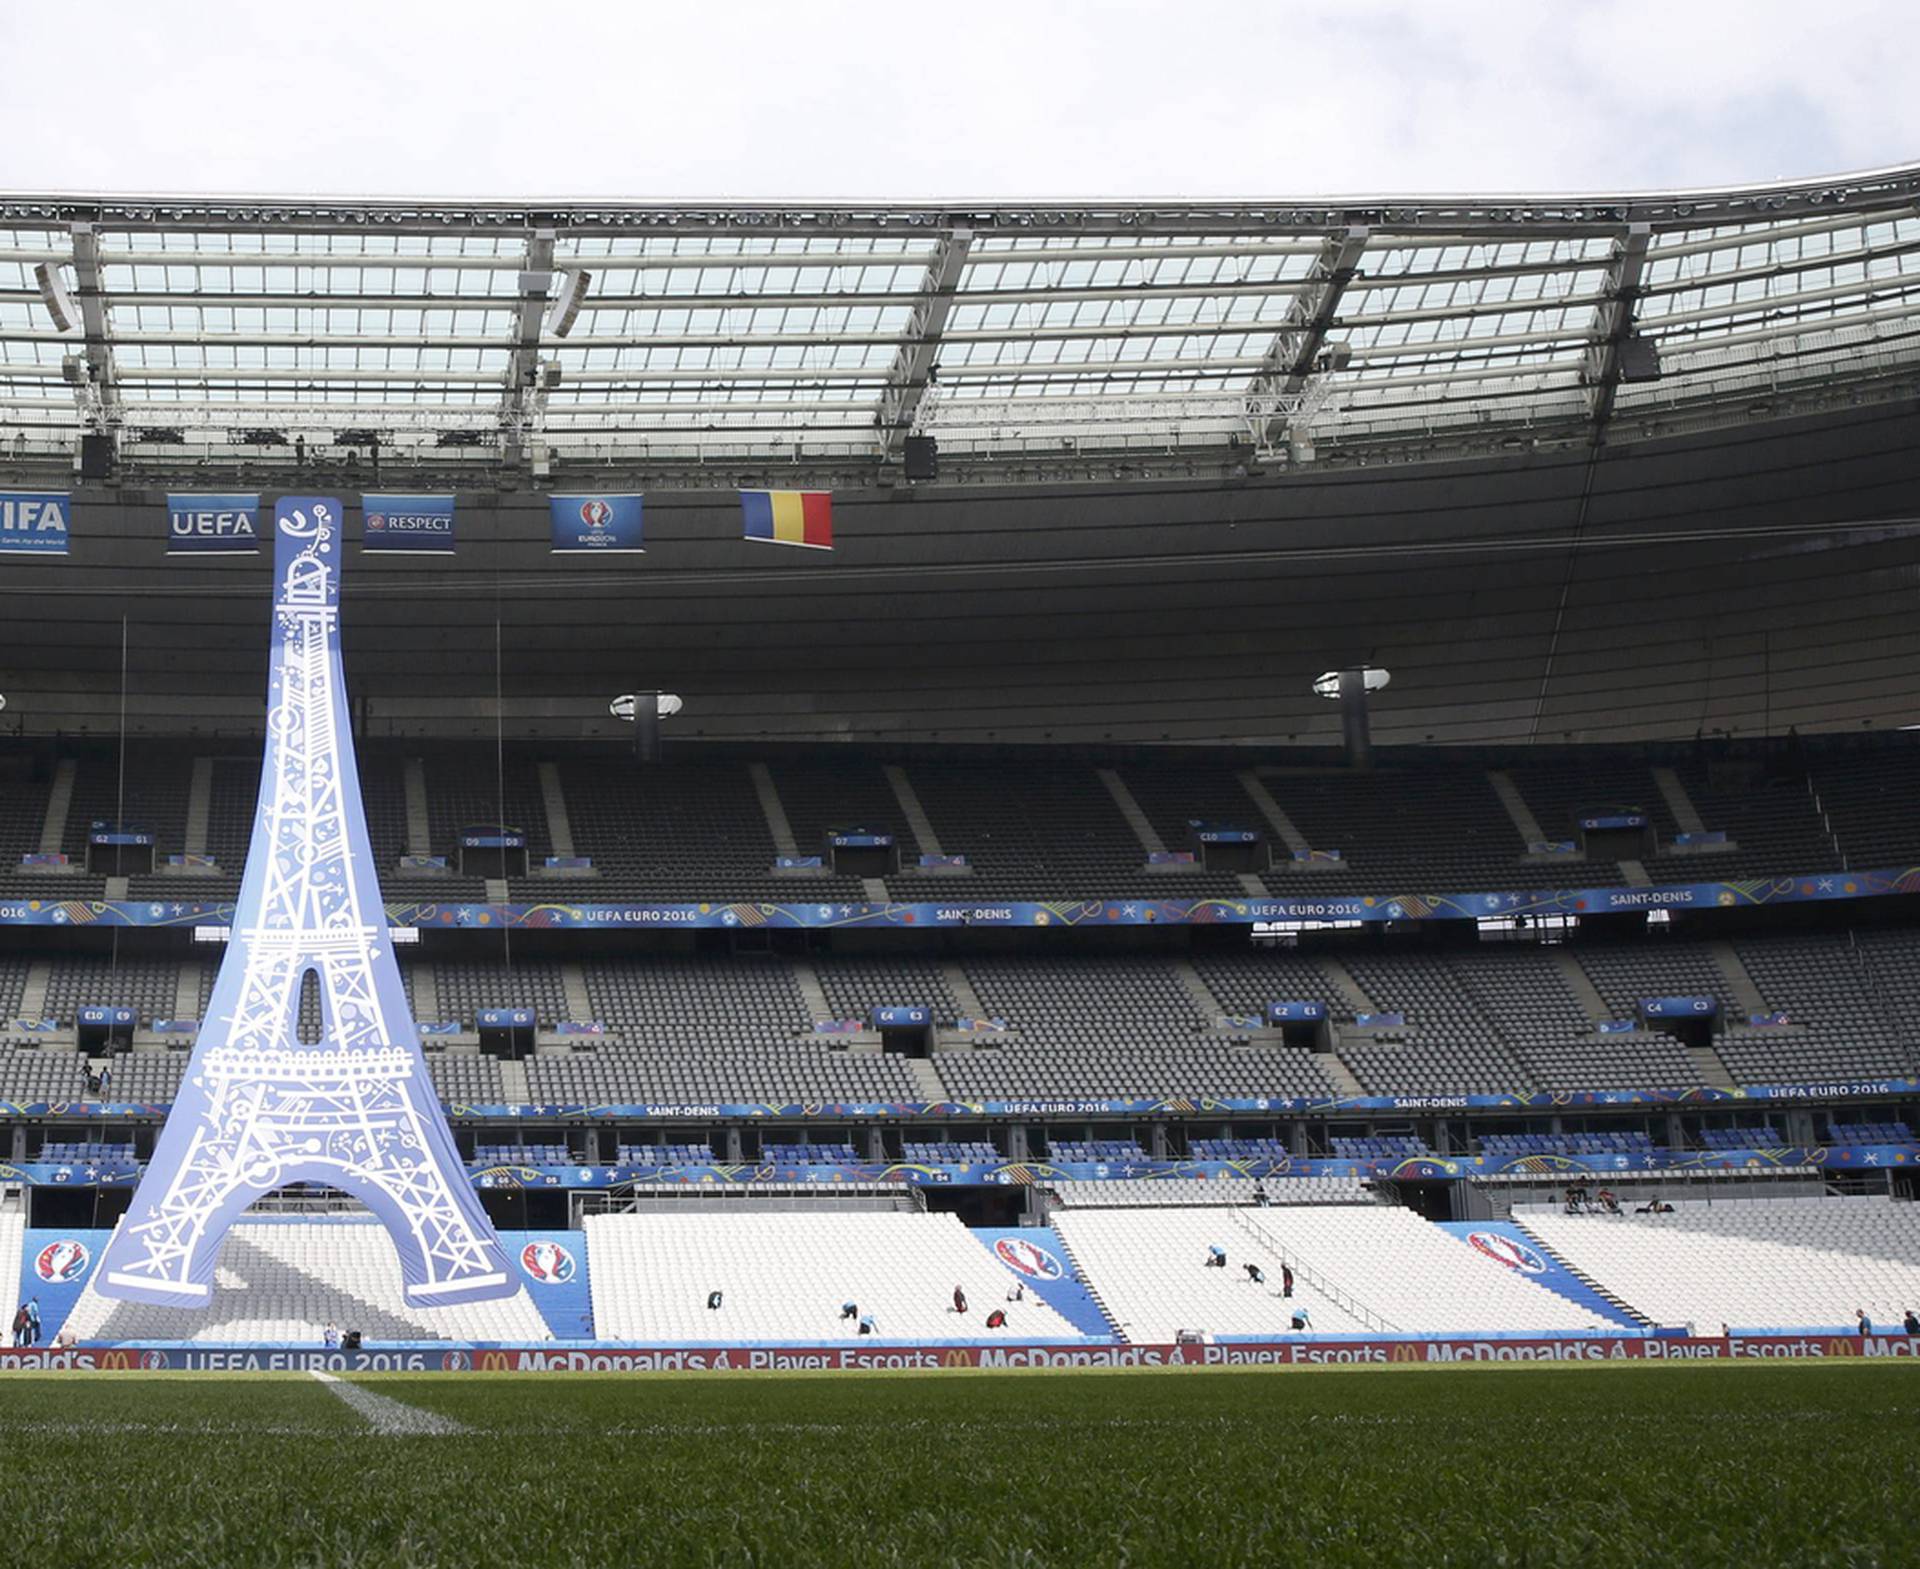 A huge banner of the Eiffel Tower is seen at the Stade de France in Saint-Denis before the start of the UEFA 2016 European Championship in Paris